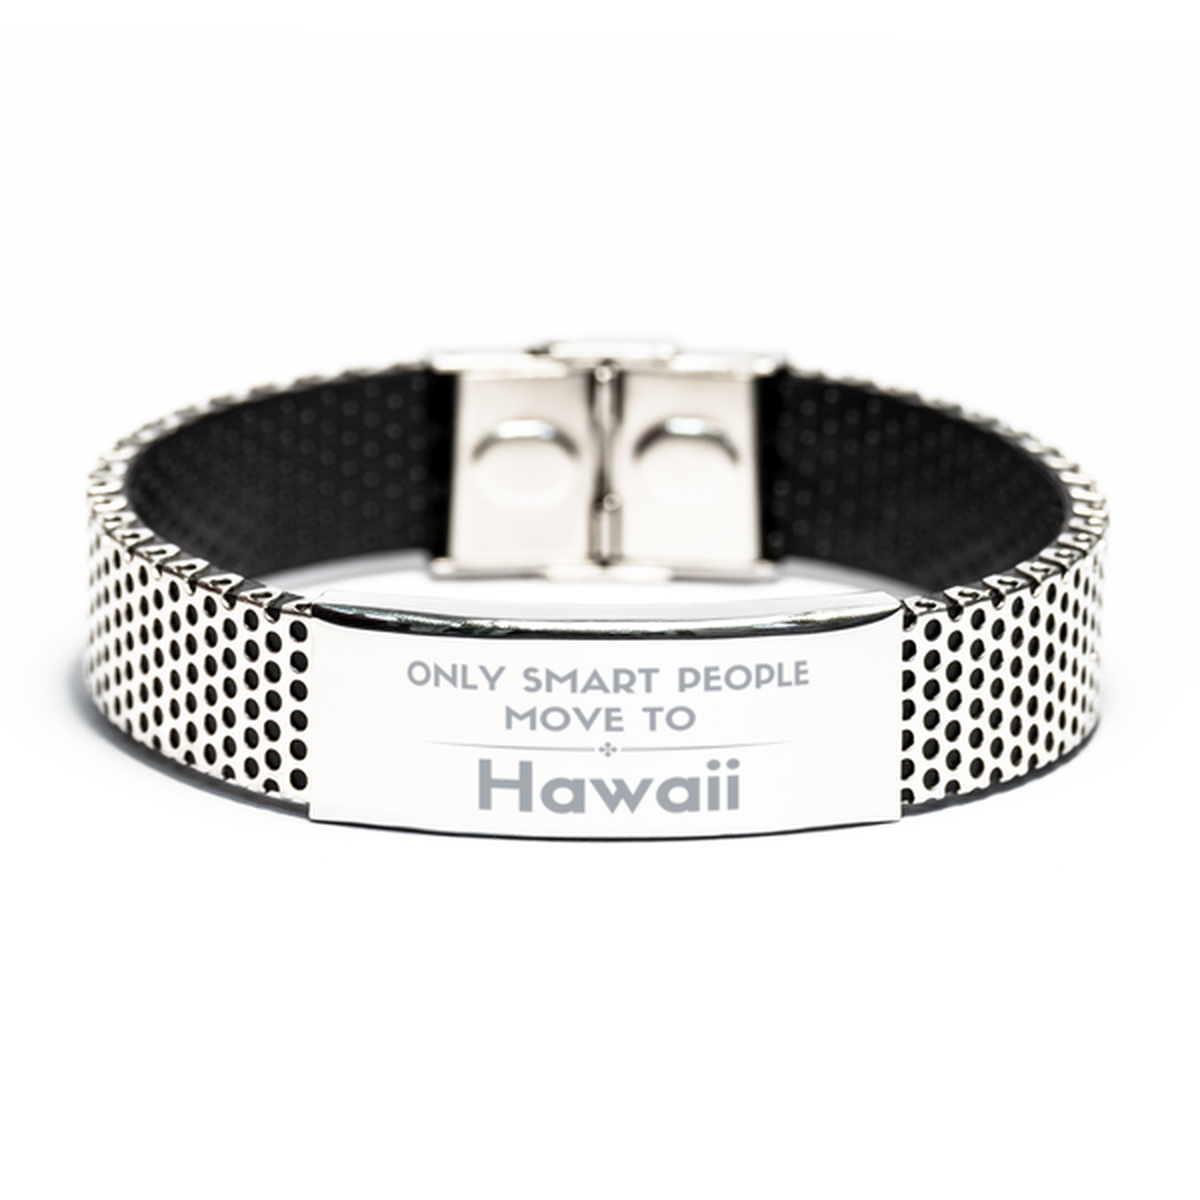 Only smart people move to Hawaii Stainless Steel Bracelet, Gag Gifts For Hawaii, Move to Hawaii Gifts for Friends Coworker Funny Saying Quote